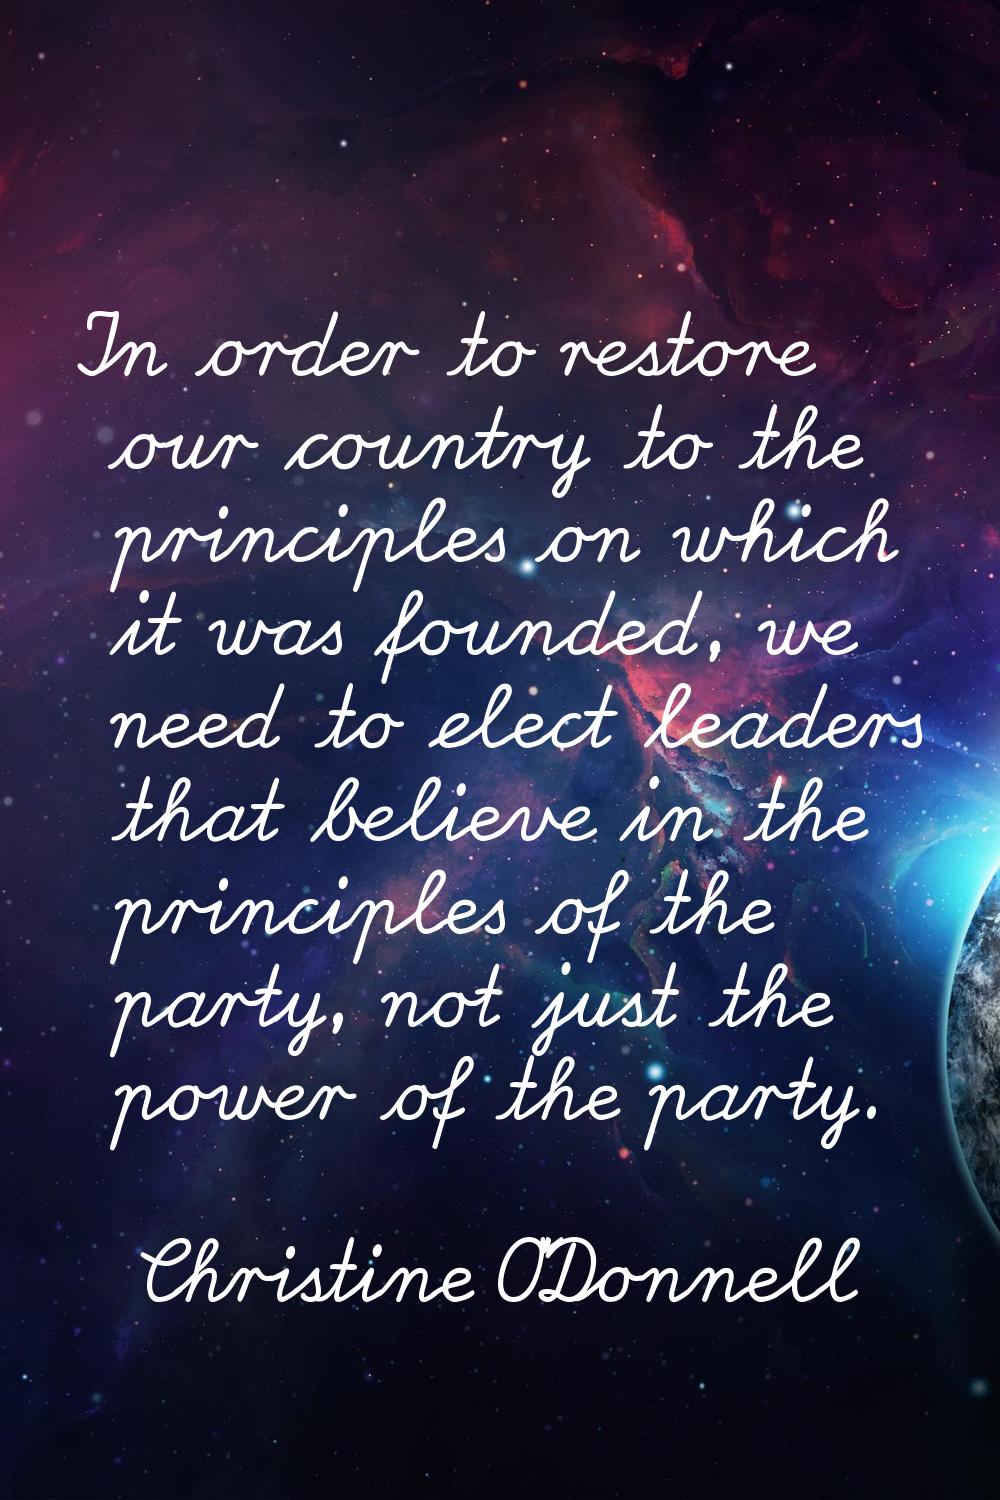 In order to restore our country to the principles on which it was founded, we need to elect leaders